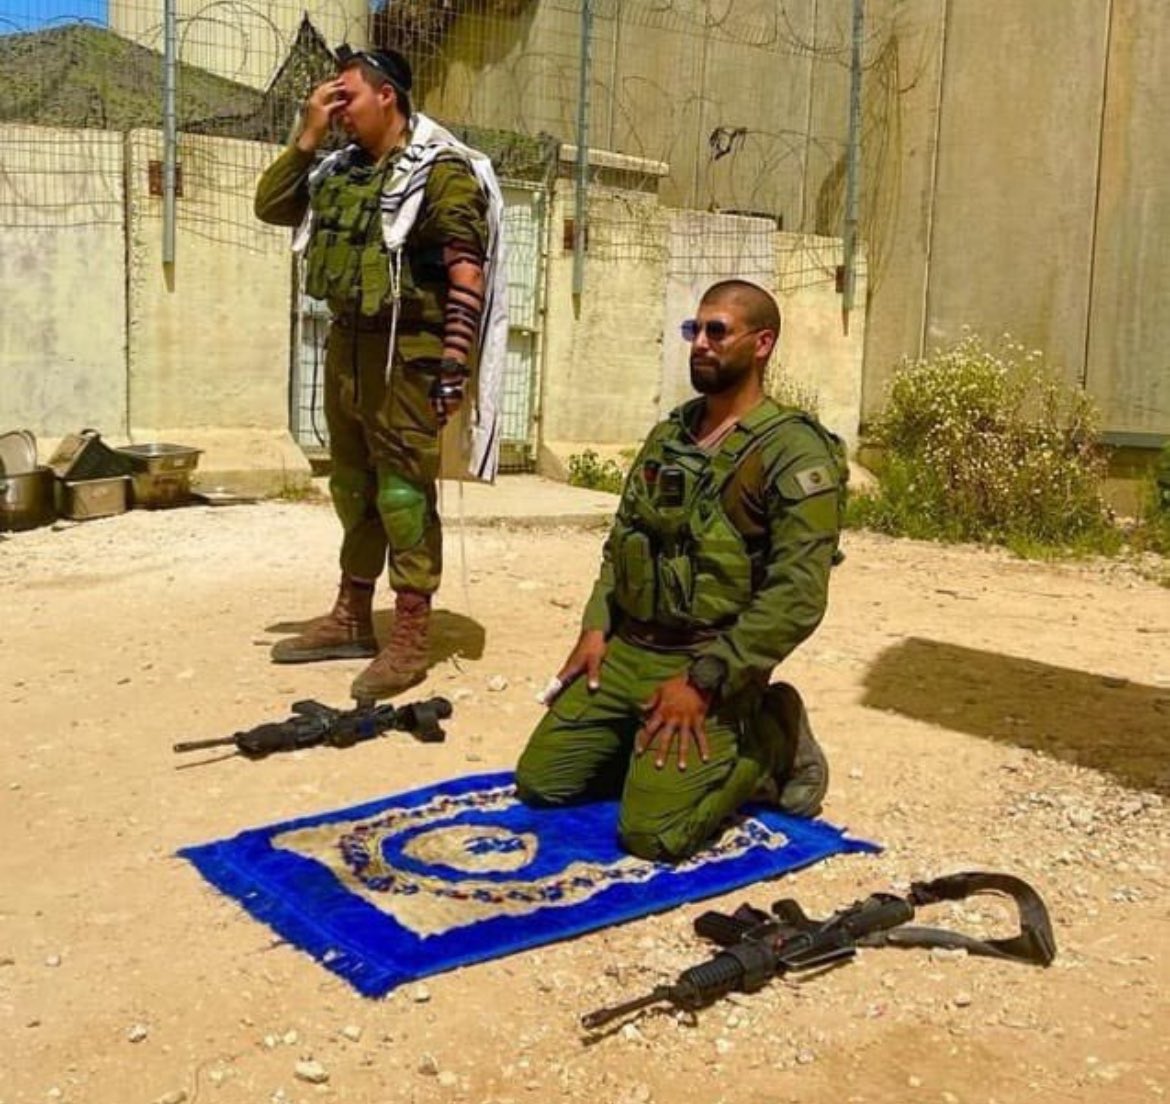 A Jewish IDF soldier and a Muslim IDF soldier praying together and defending their country together. This is the Israel Defense Forces.